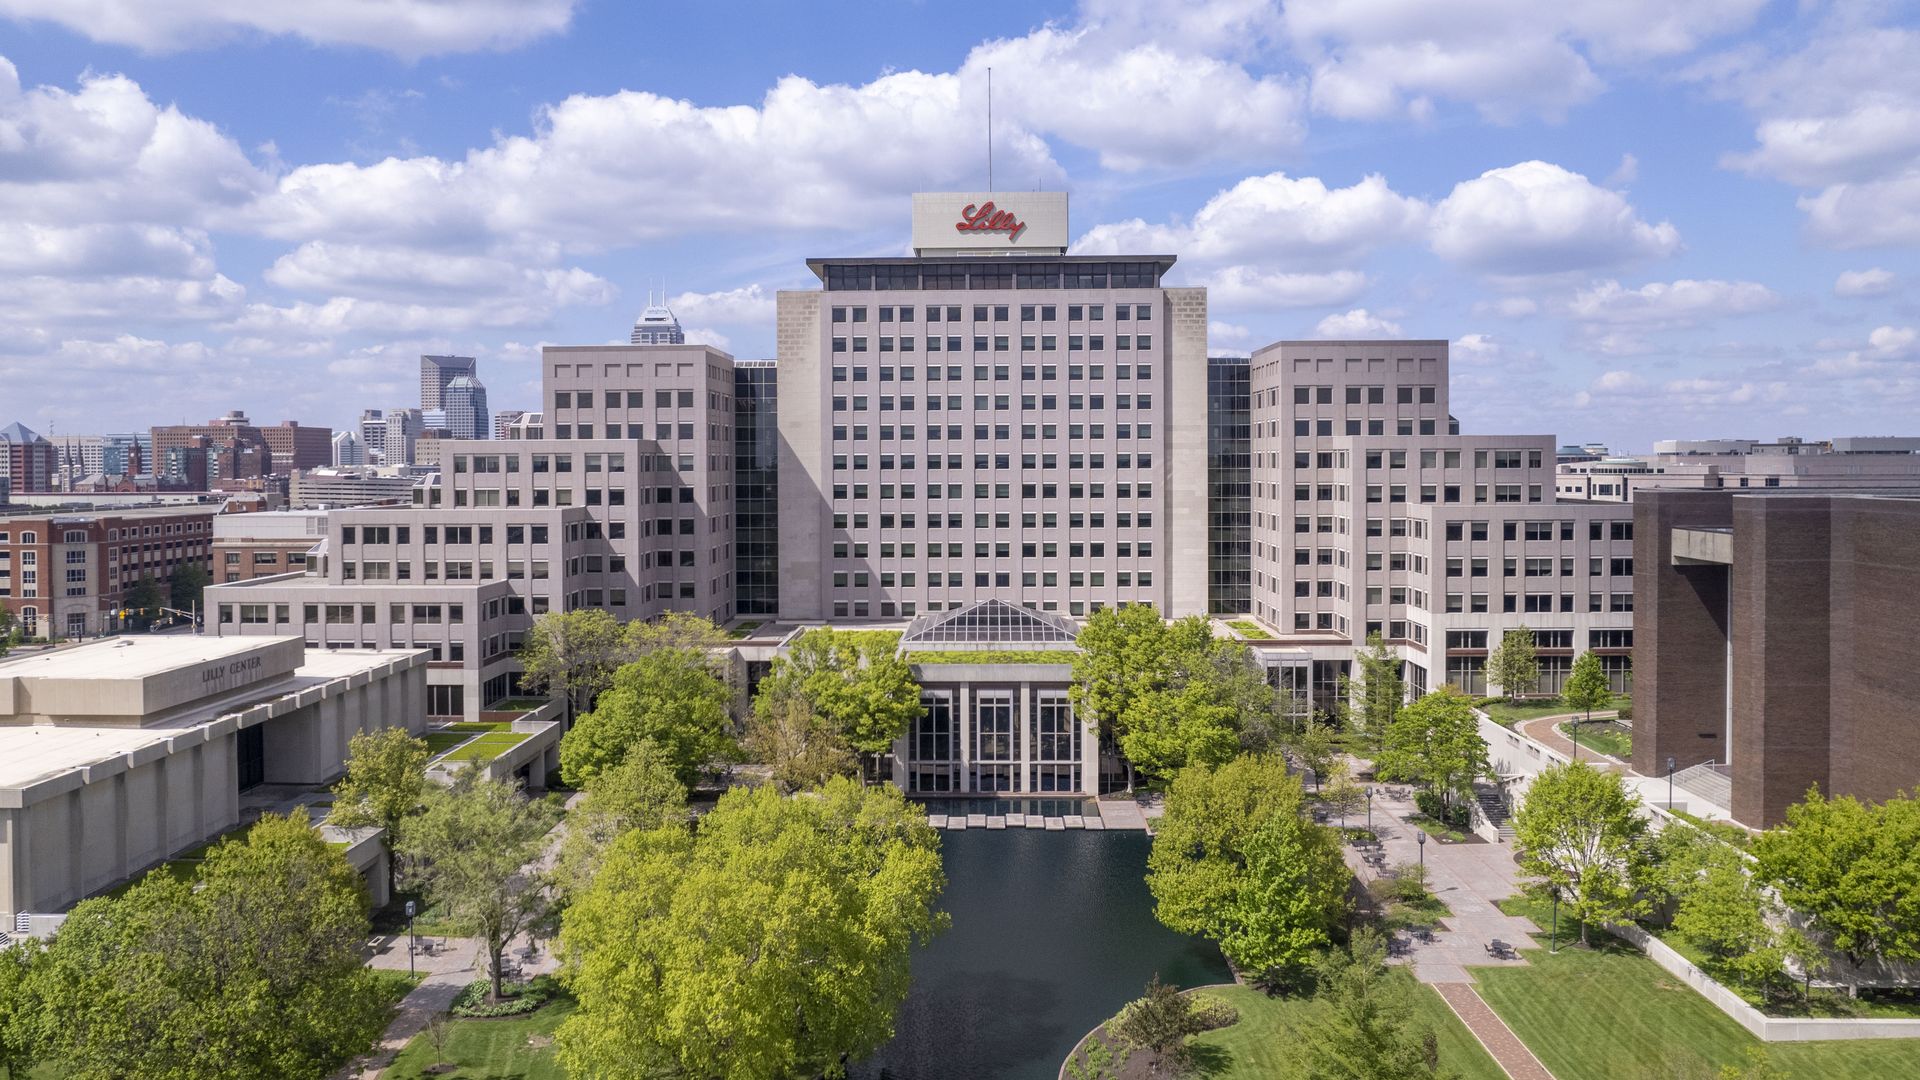 A photo of the Eli Lilly campus